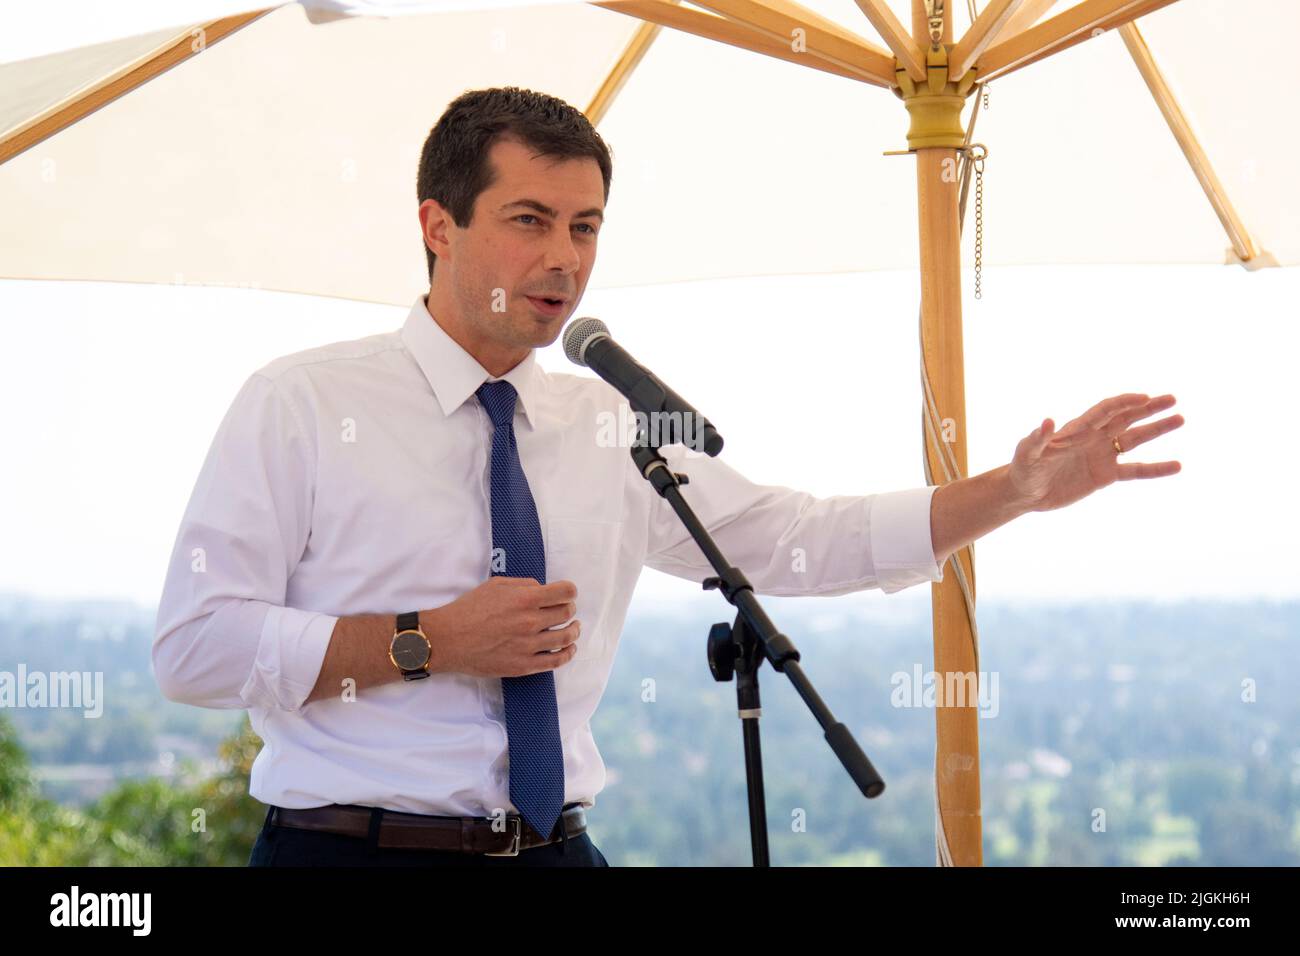 Democratic Presidential Candidate and current United States Secretary of Transportation Pete Buttigieg speaks at an event in California. Stock Photo